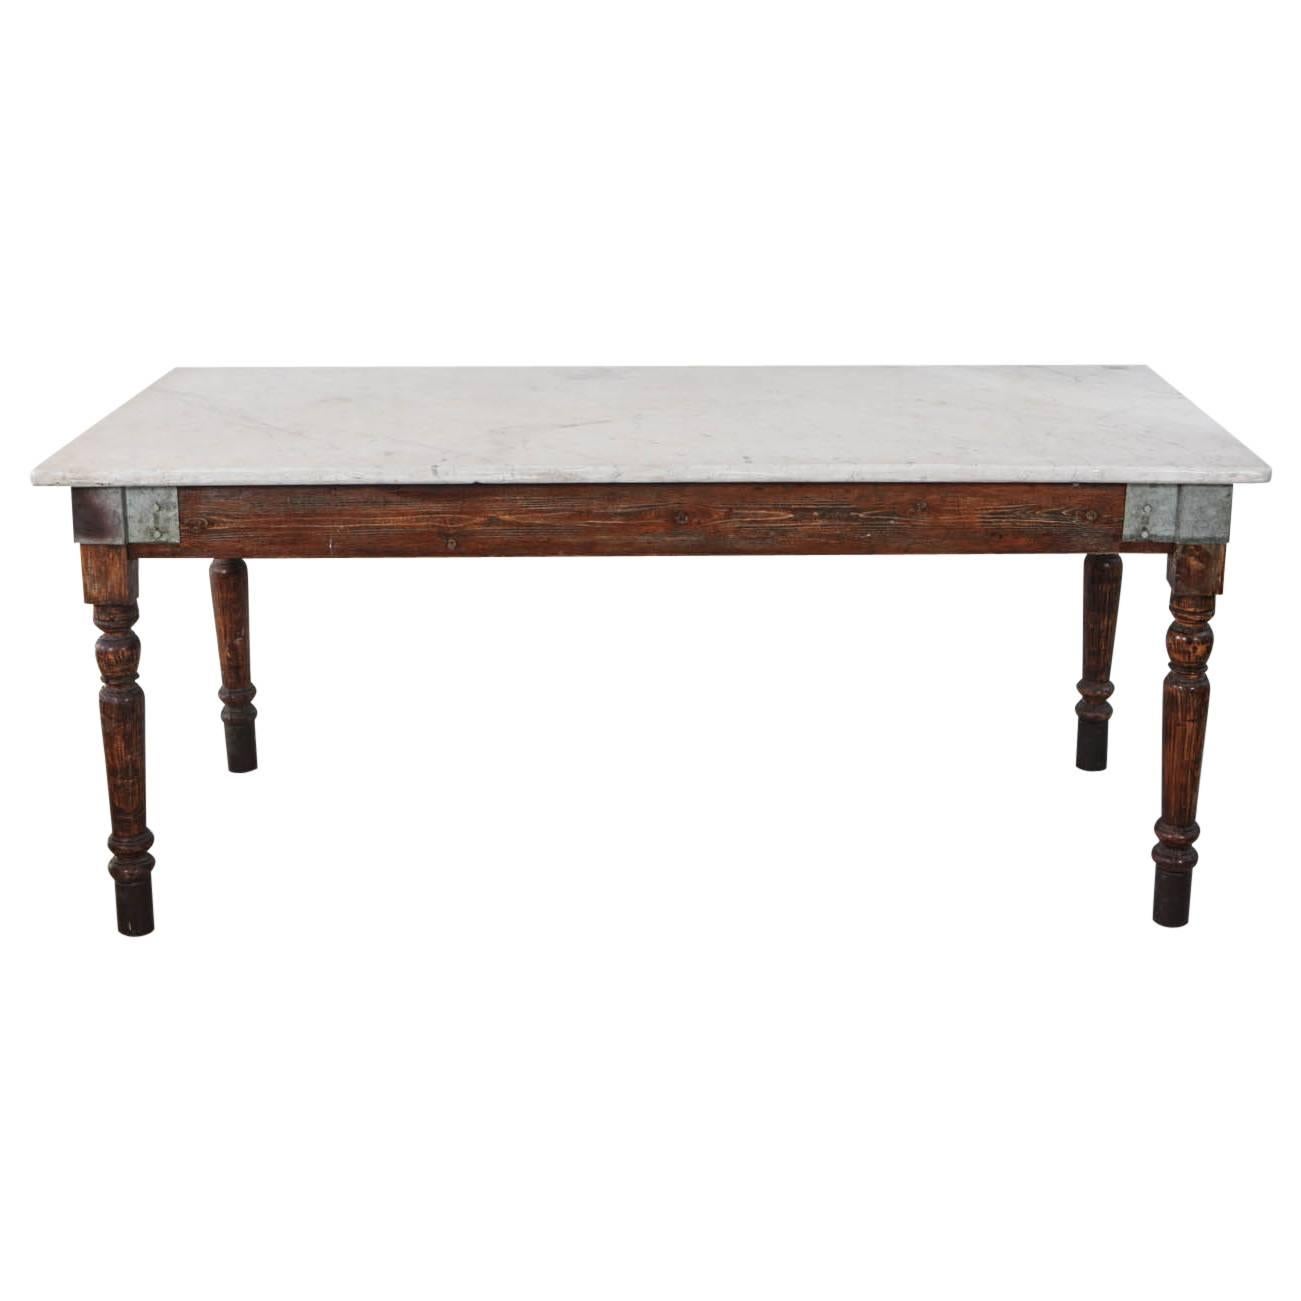 Italian Farm Table with White Marble Top